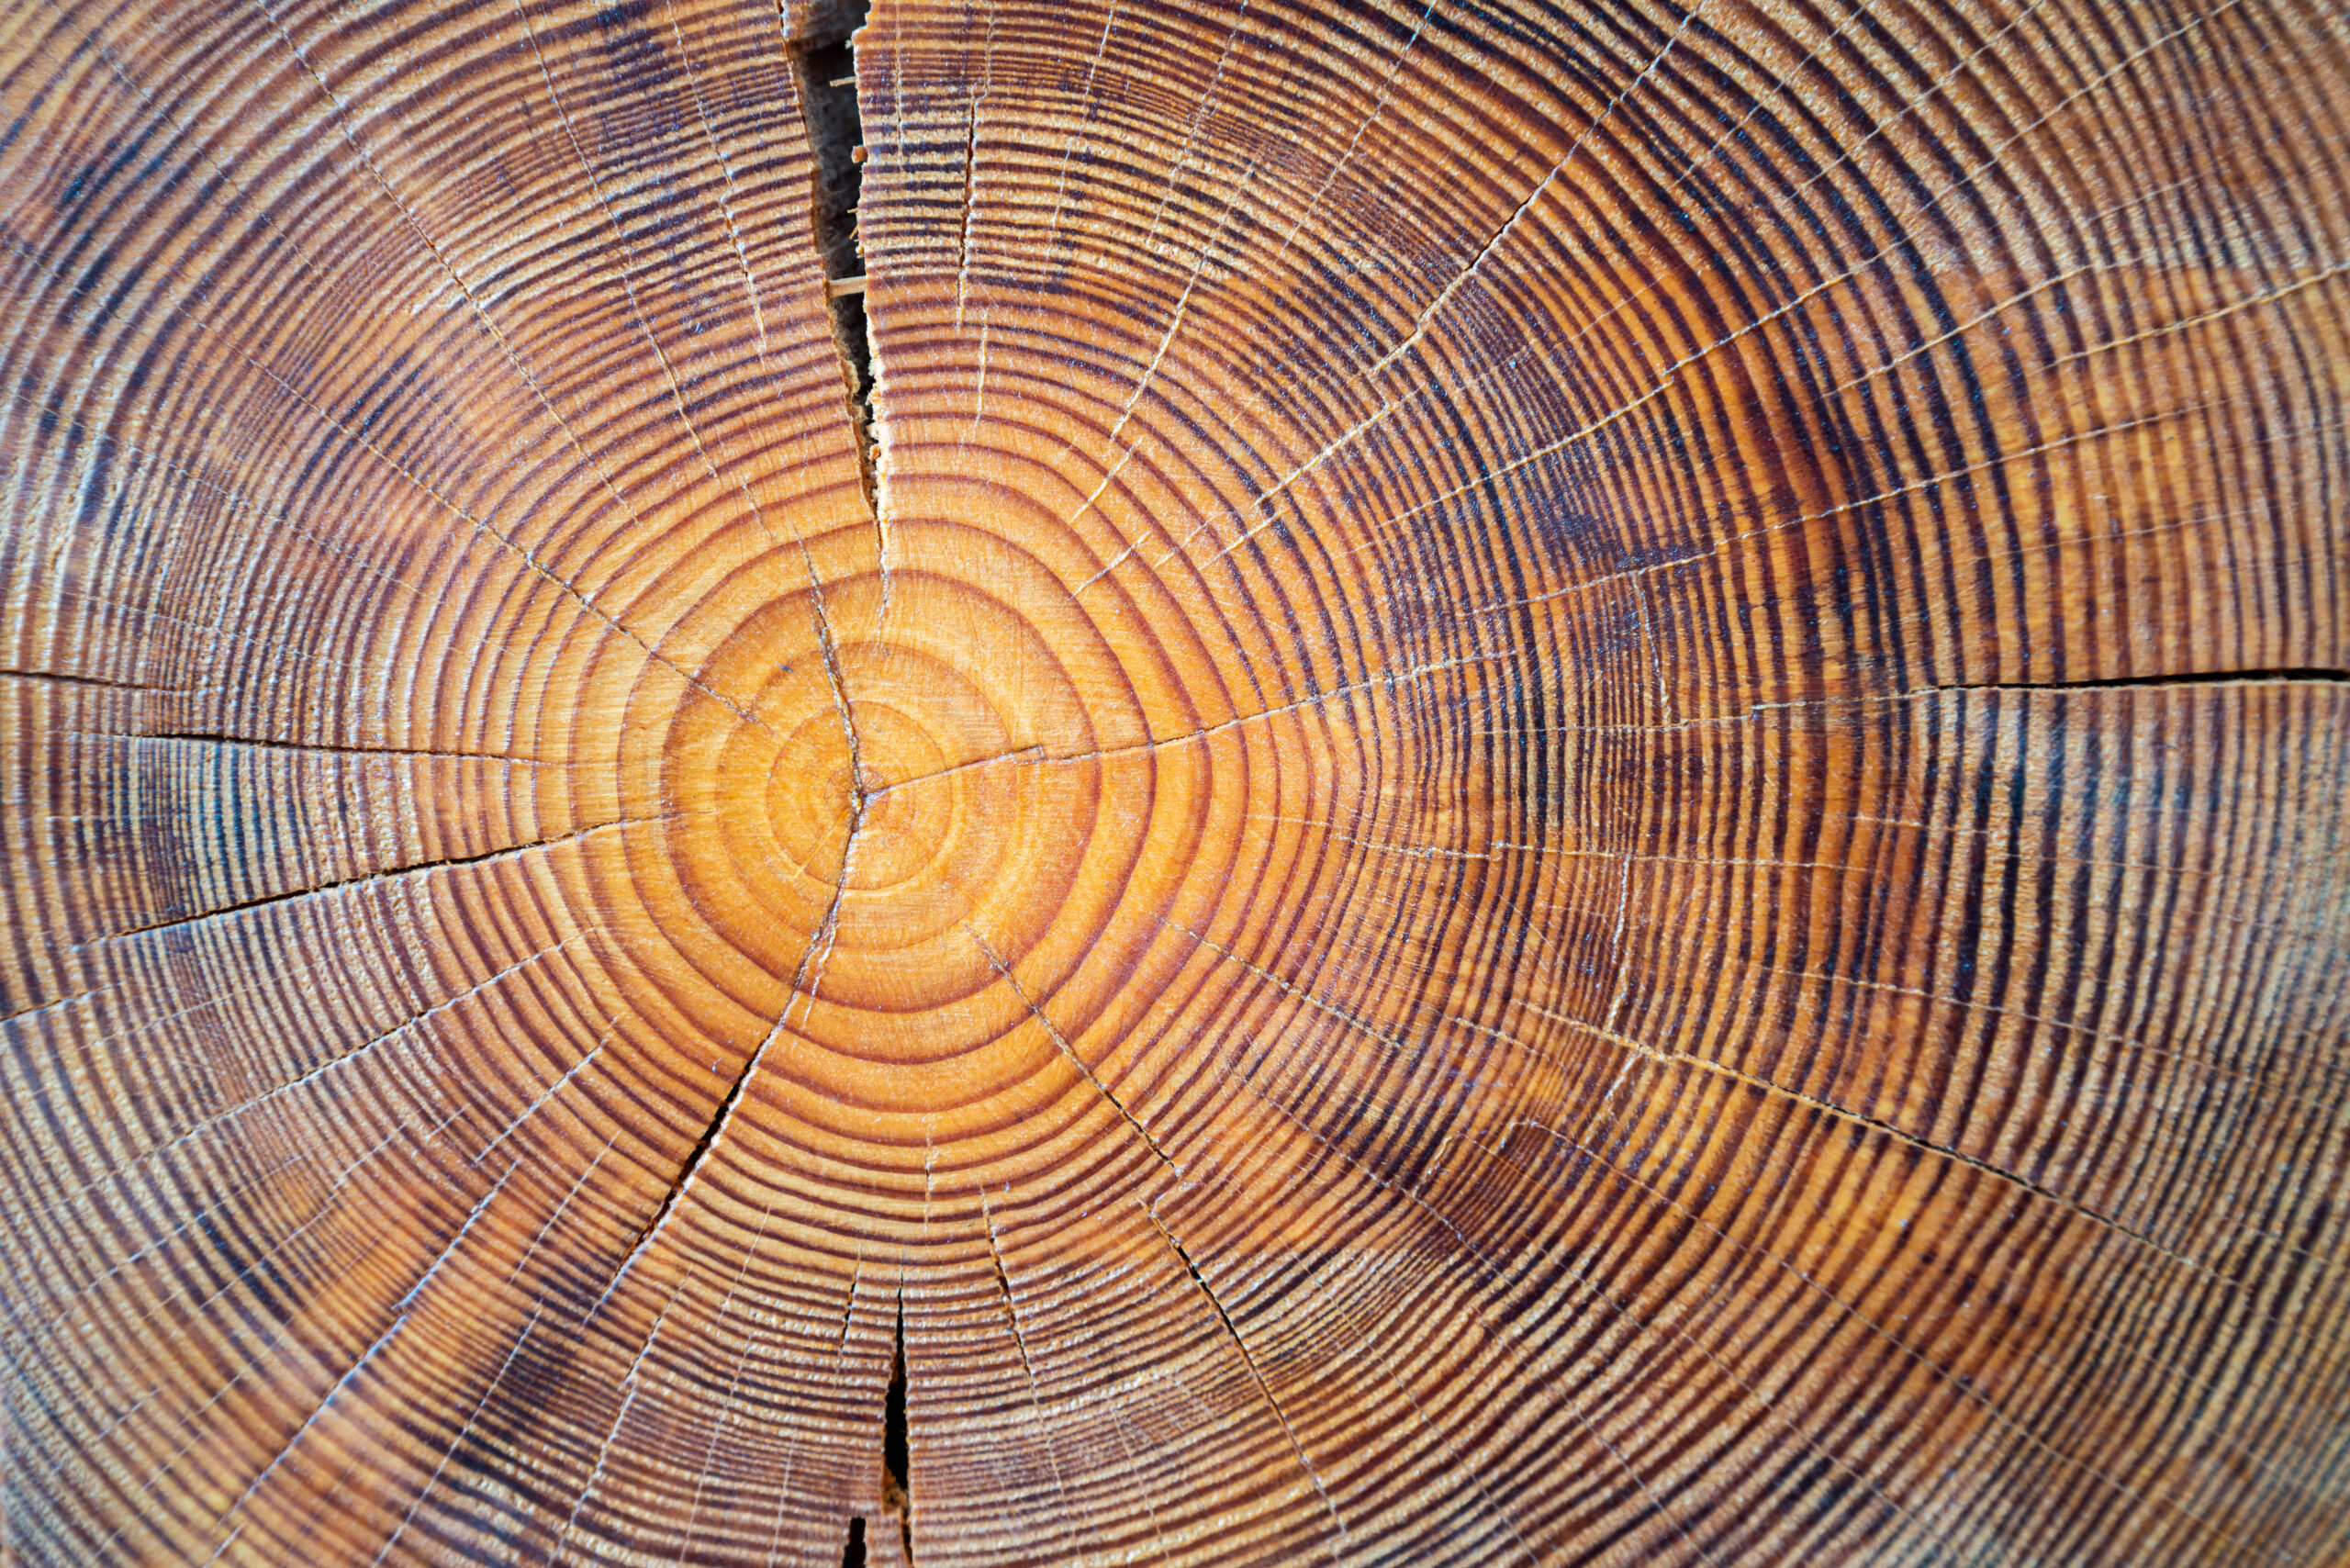 Tree rings reveal a new kind of earthquake threat to the Pacific Northwest